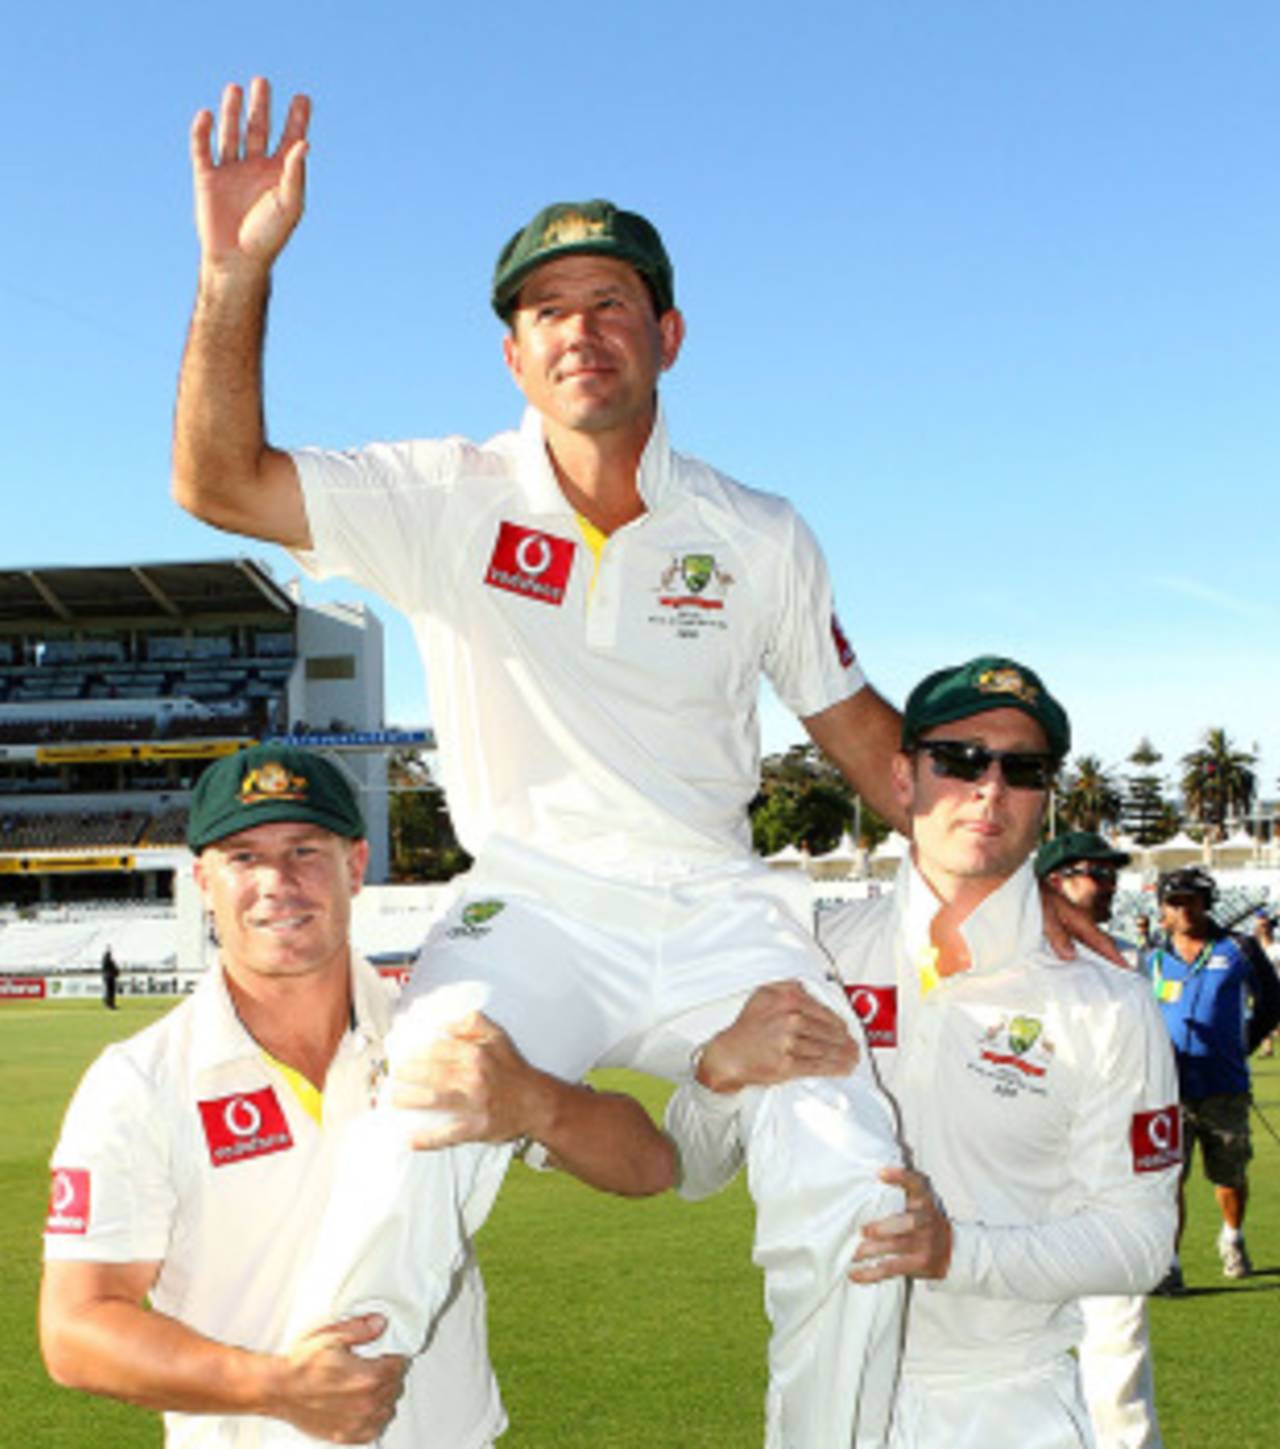 Ricky Ponting is carried by David Warner and Michael Clarke after the Perth Test, Australia v South Africa, 3rd Test, Perth, 4th day, December 3, 2012